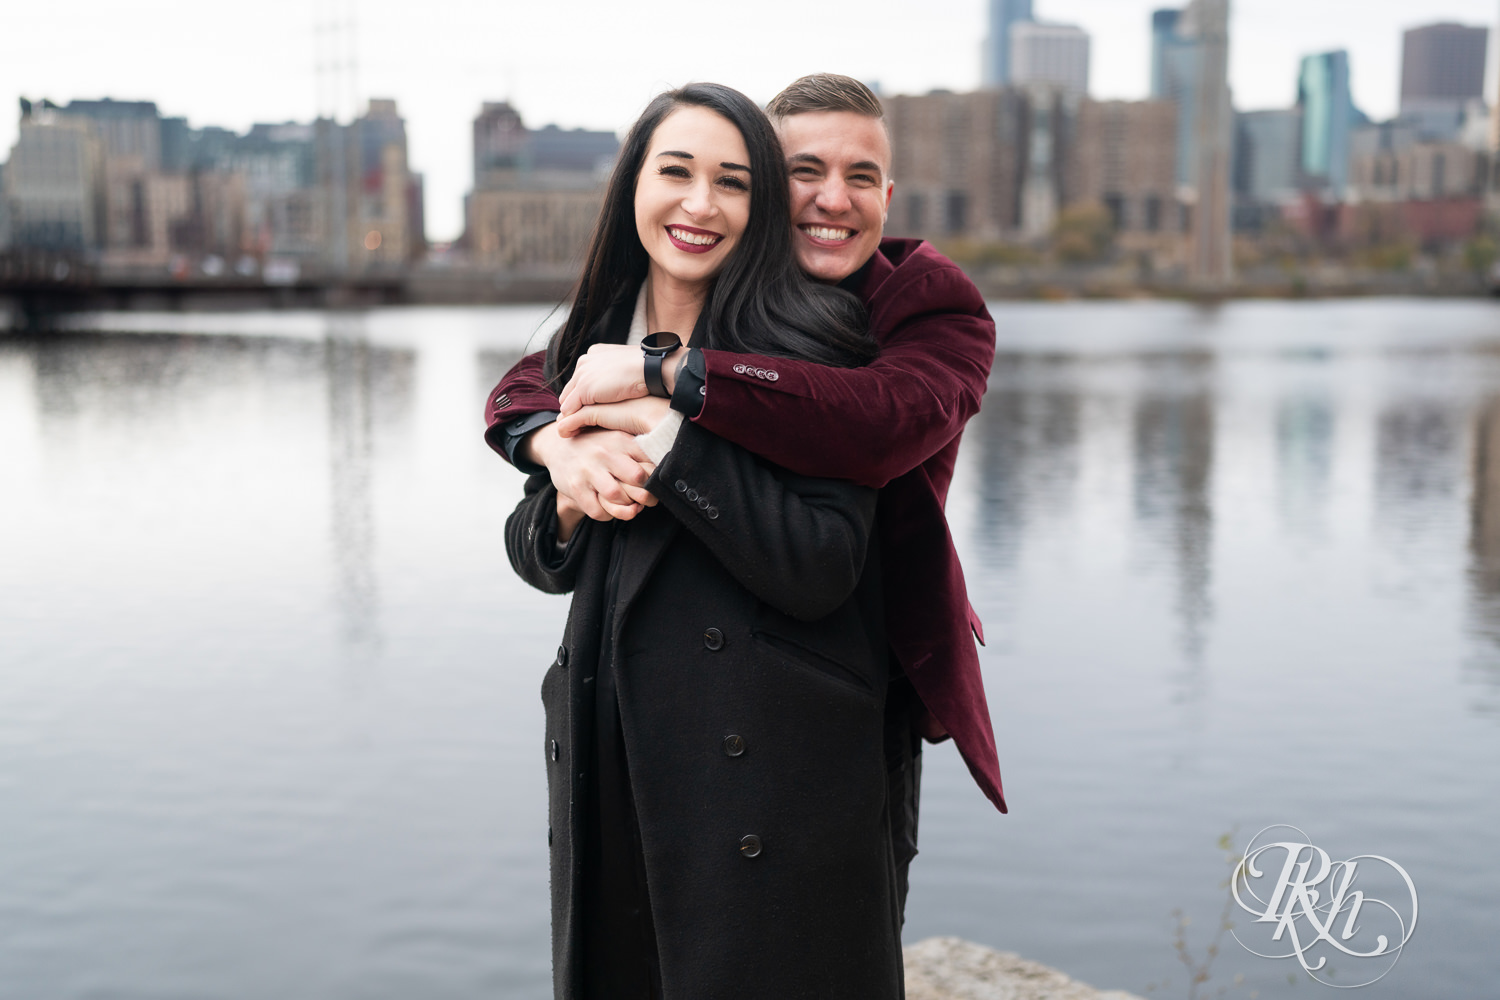 Man in black clothes and burgundy jacket and woman in black dress smile in front of the river in Minneapolis, Minnesota.